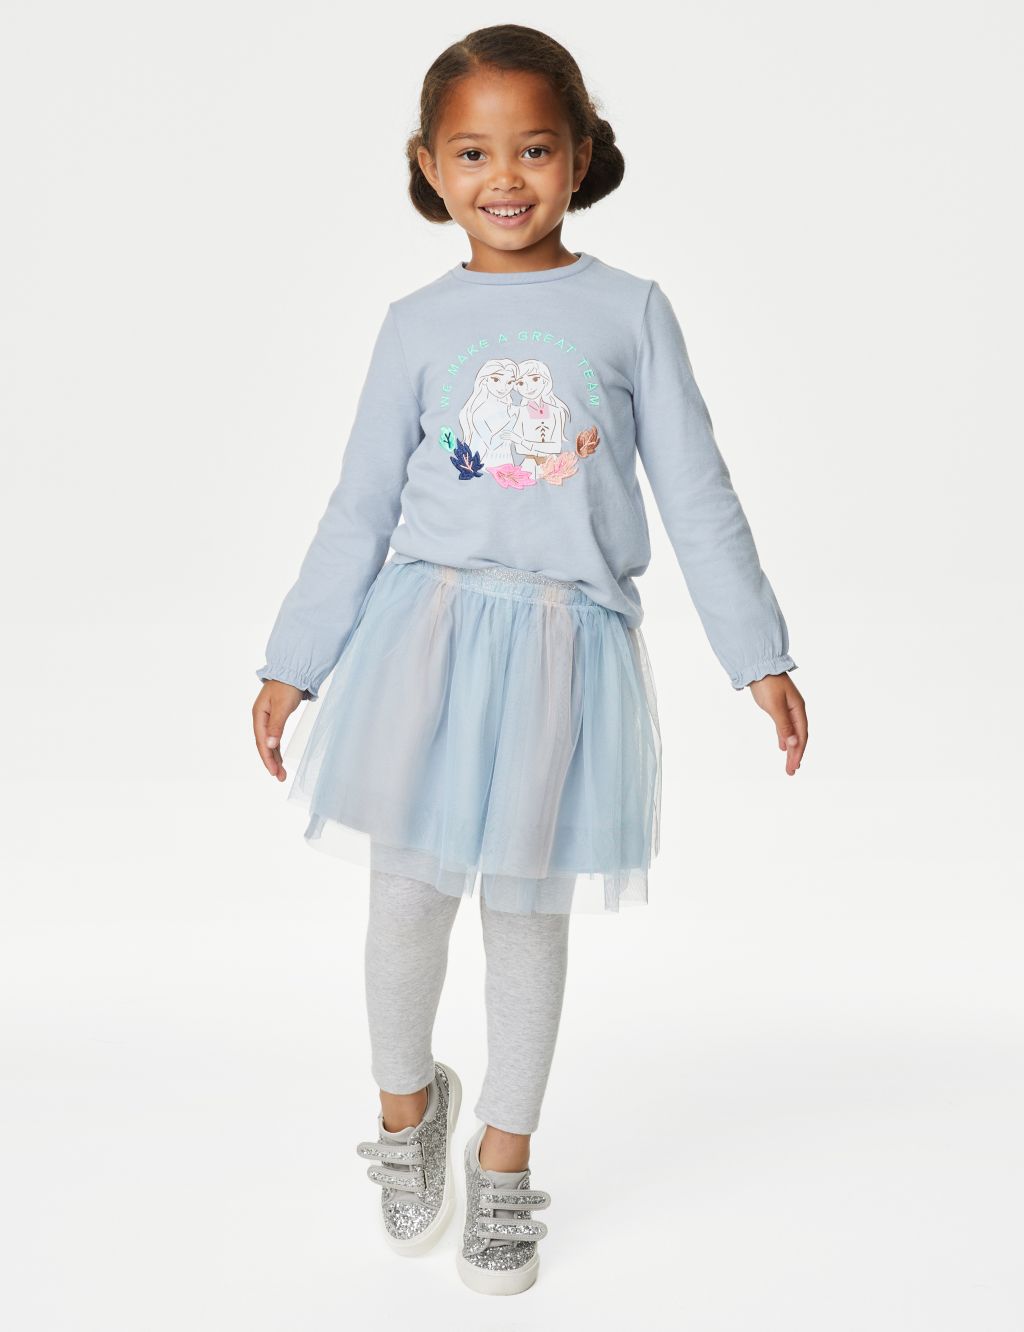 2pc Frozen™ Top & Bottom Outfit (2-8 Yrs) image 1